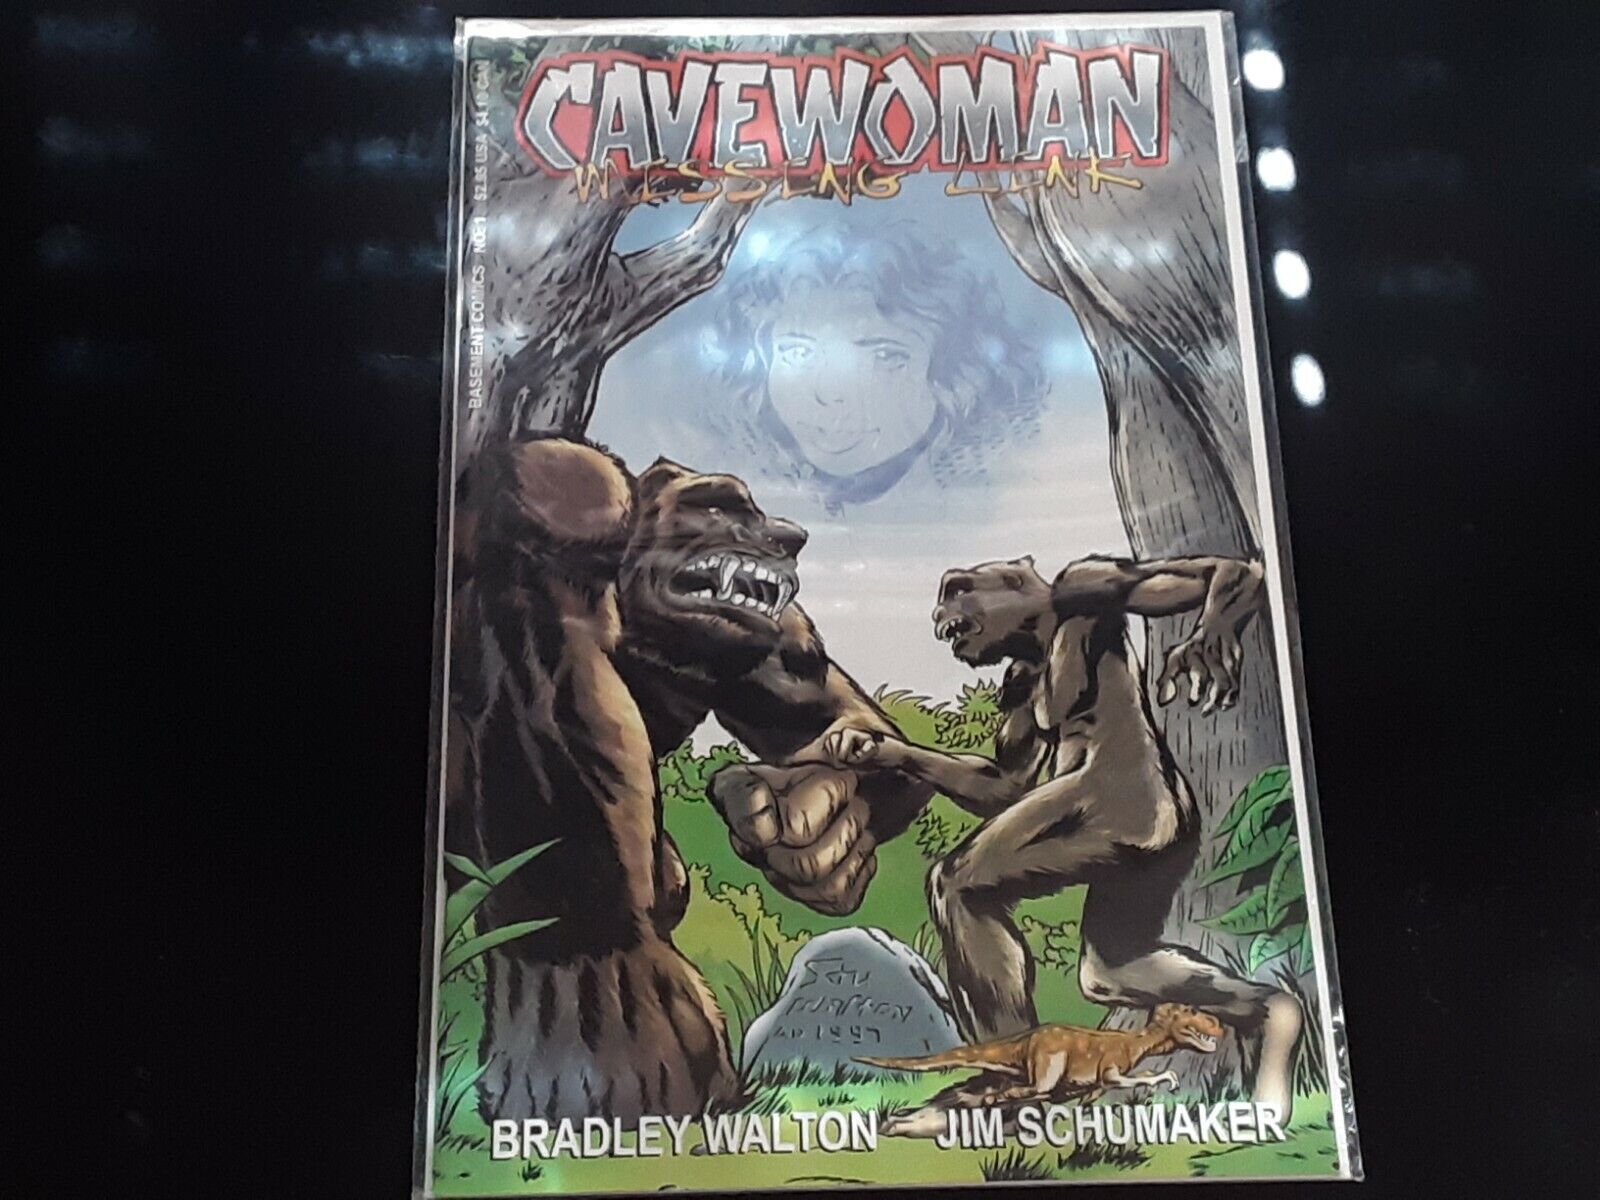 Cave Woman Missing Link #1 Sword and Sorcery High Grade Comic Book RM6-194